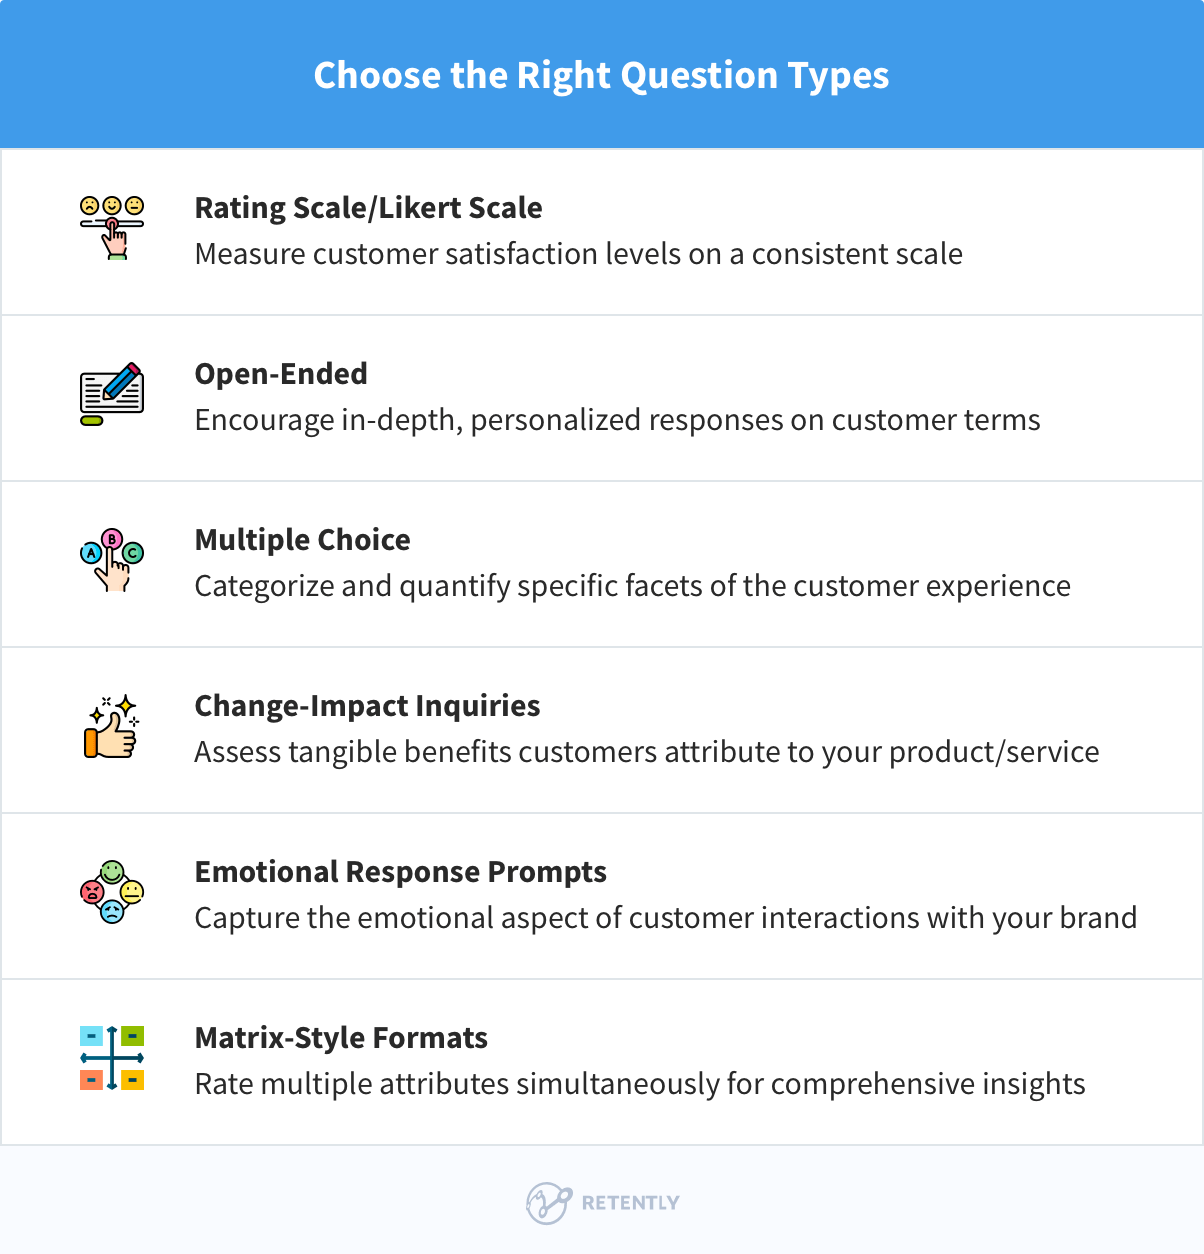 Choose the Right Question Type